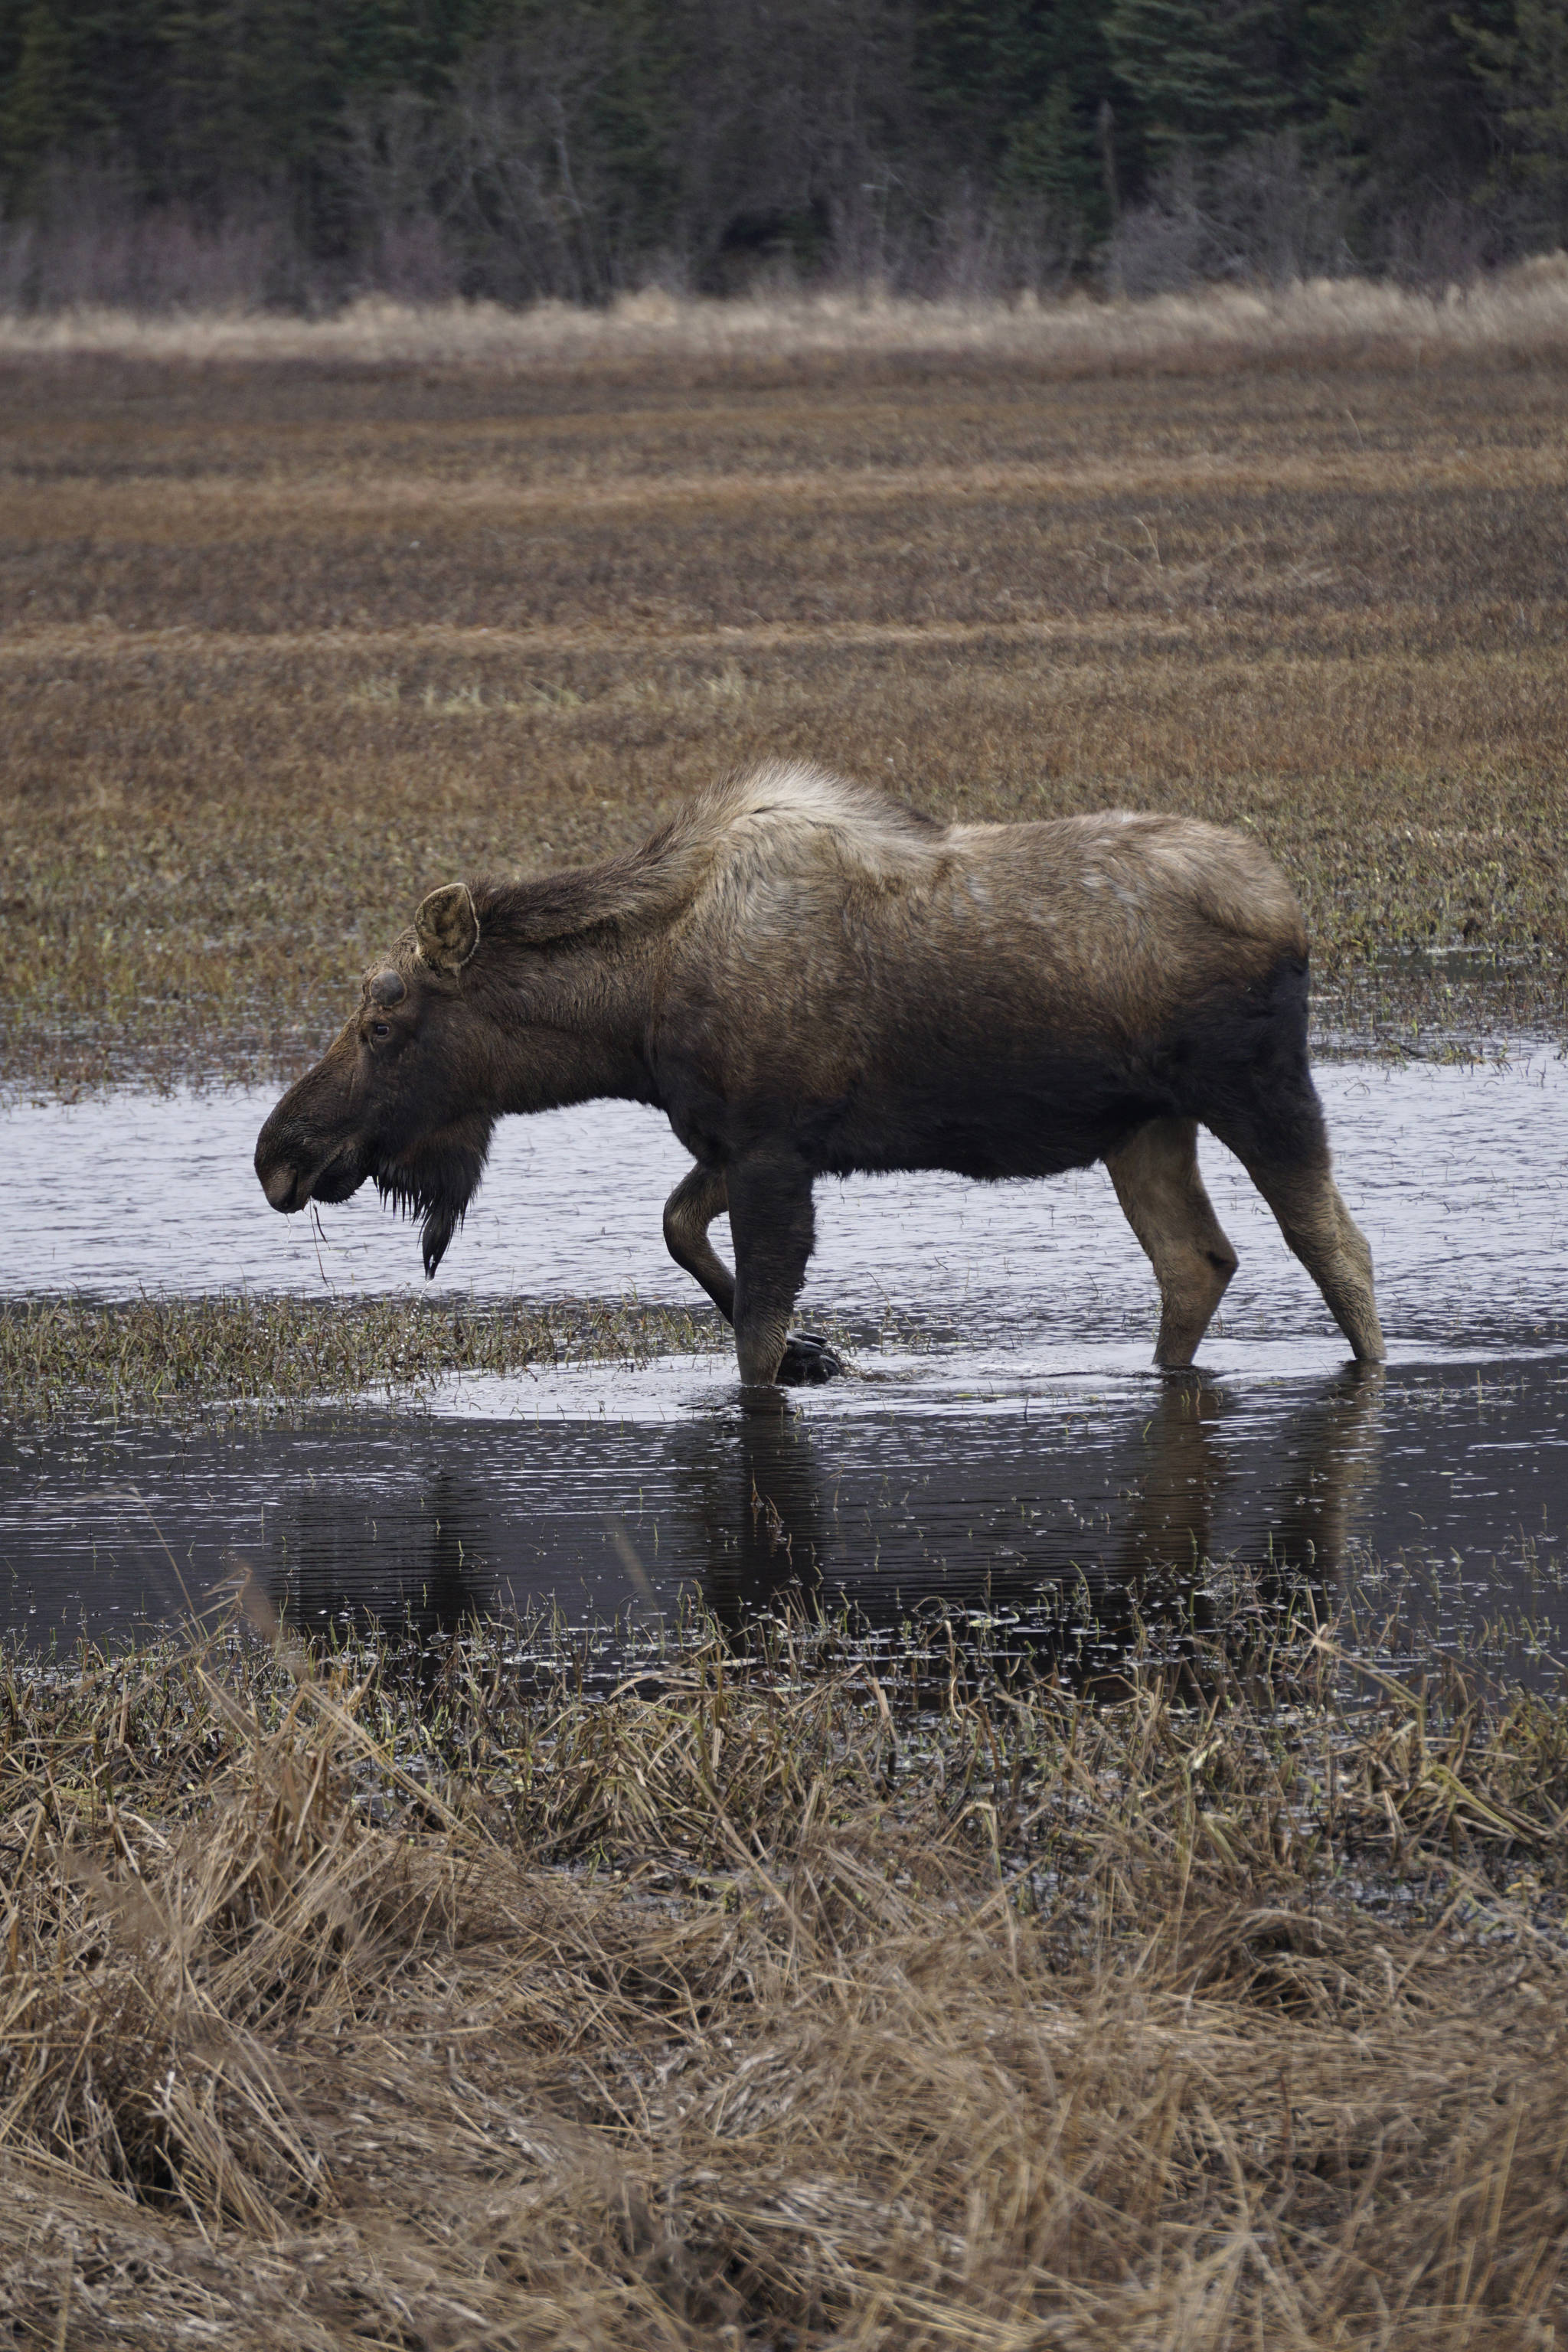 A moose browses at the east end of Beluga Lake about 6 p.m. Thursday, April 11, 2019, as seen from the airport viewing platform at the end of FAA Road in Homer, Alaska. The moose was among five moose feeding in the marsh. (Photo by Michael Armstrong/Homer News)